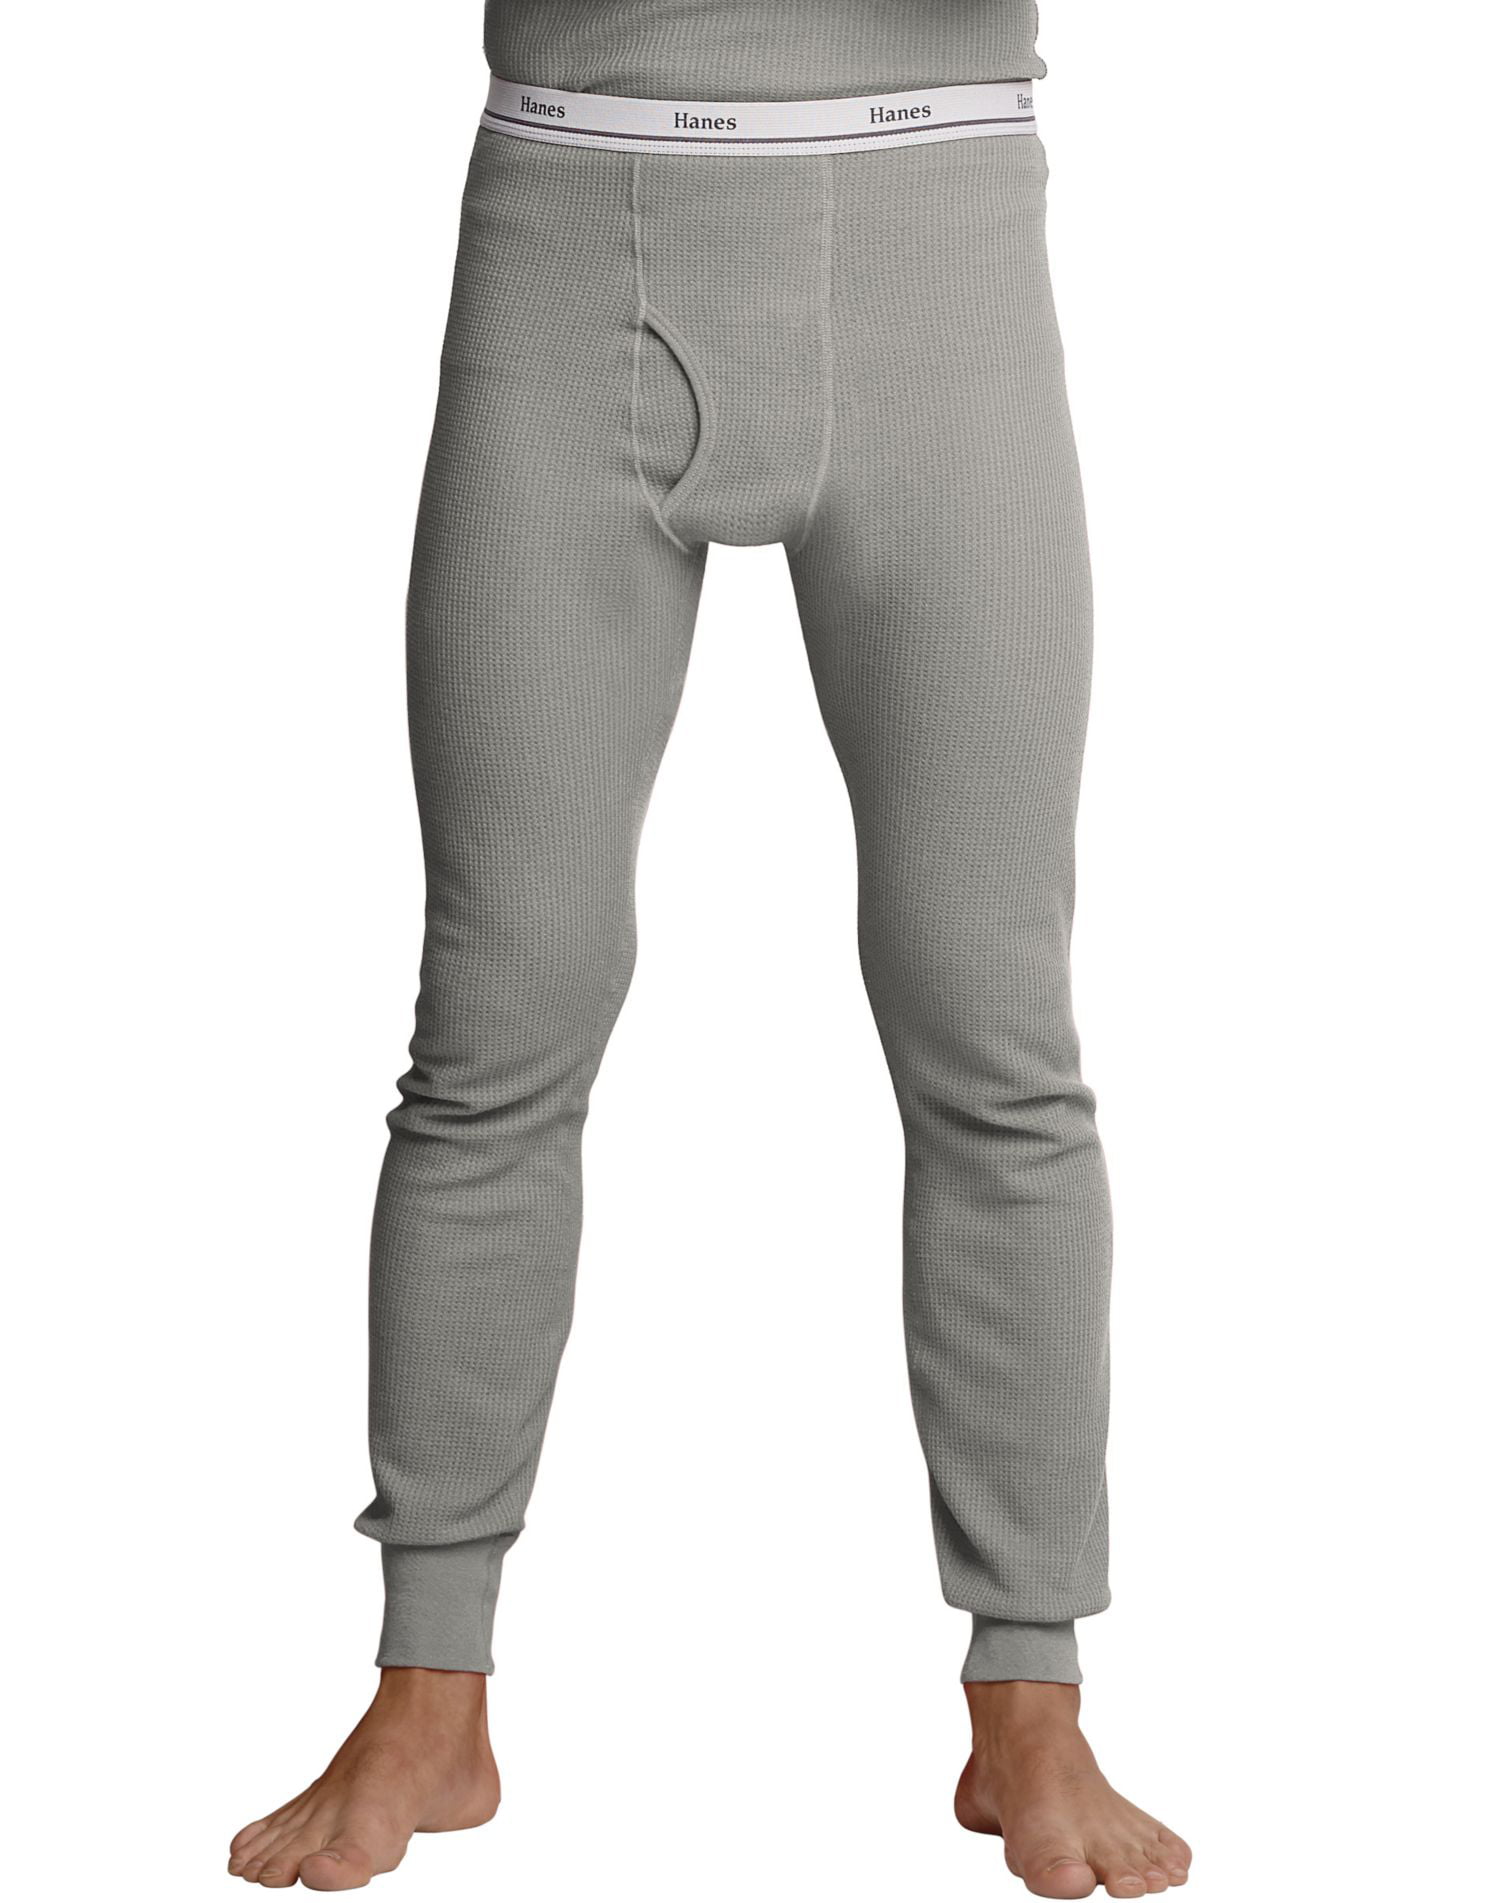 Best Thermal Underwear For Men In 2023: 14 Pairs Of Men's Long Johns ...